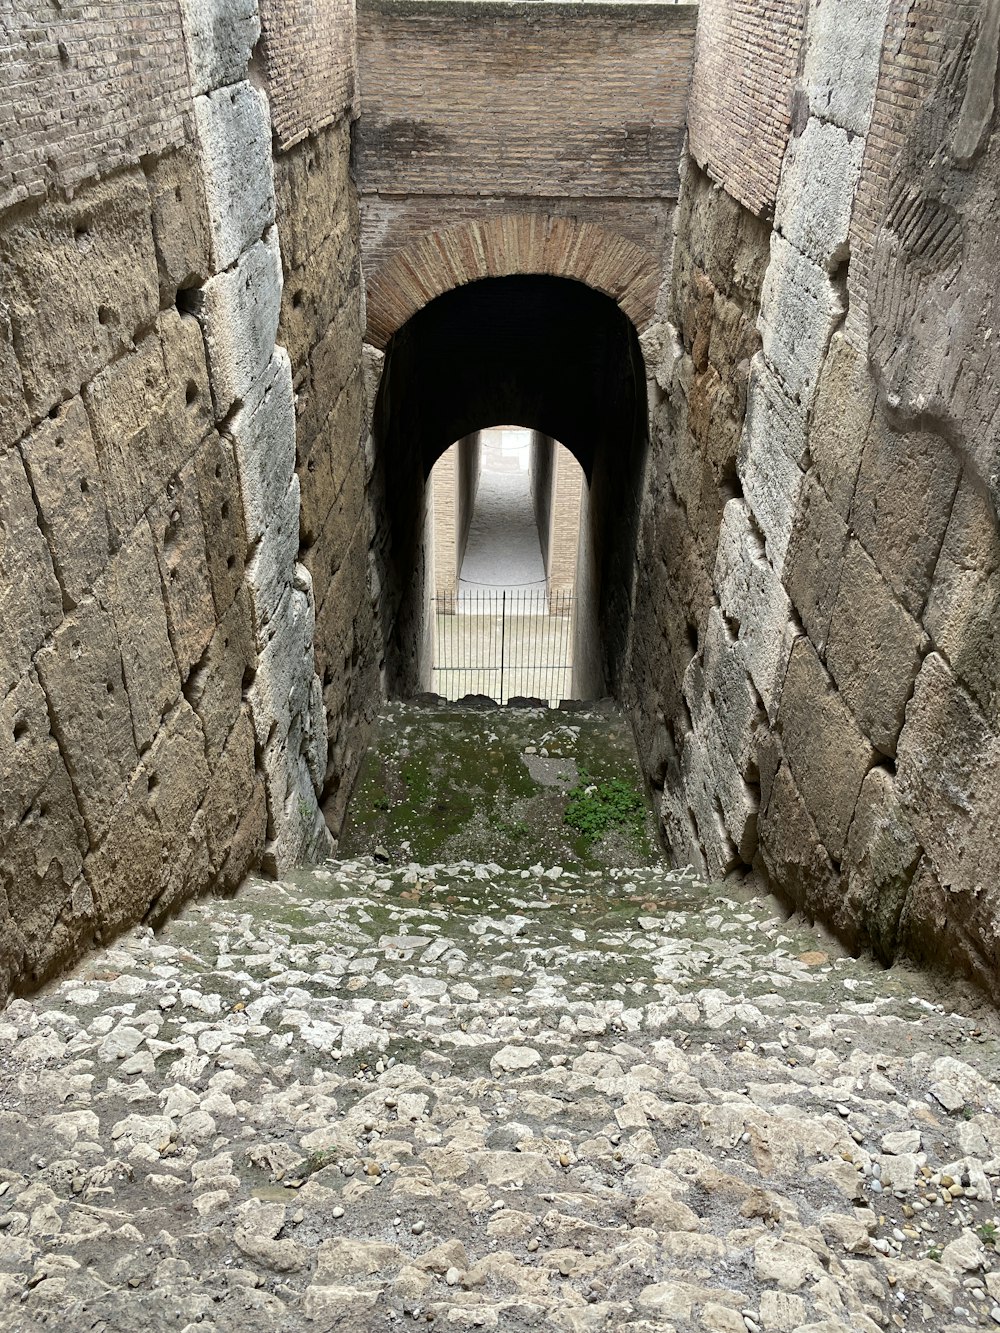 a stone tunnel with a walkway going through it